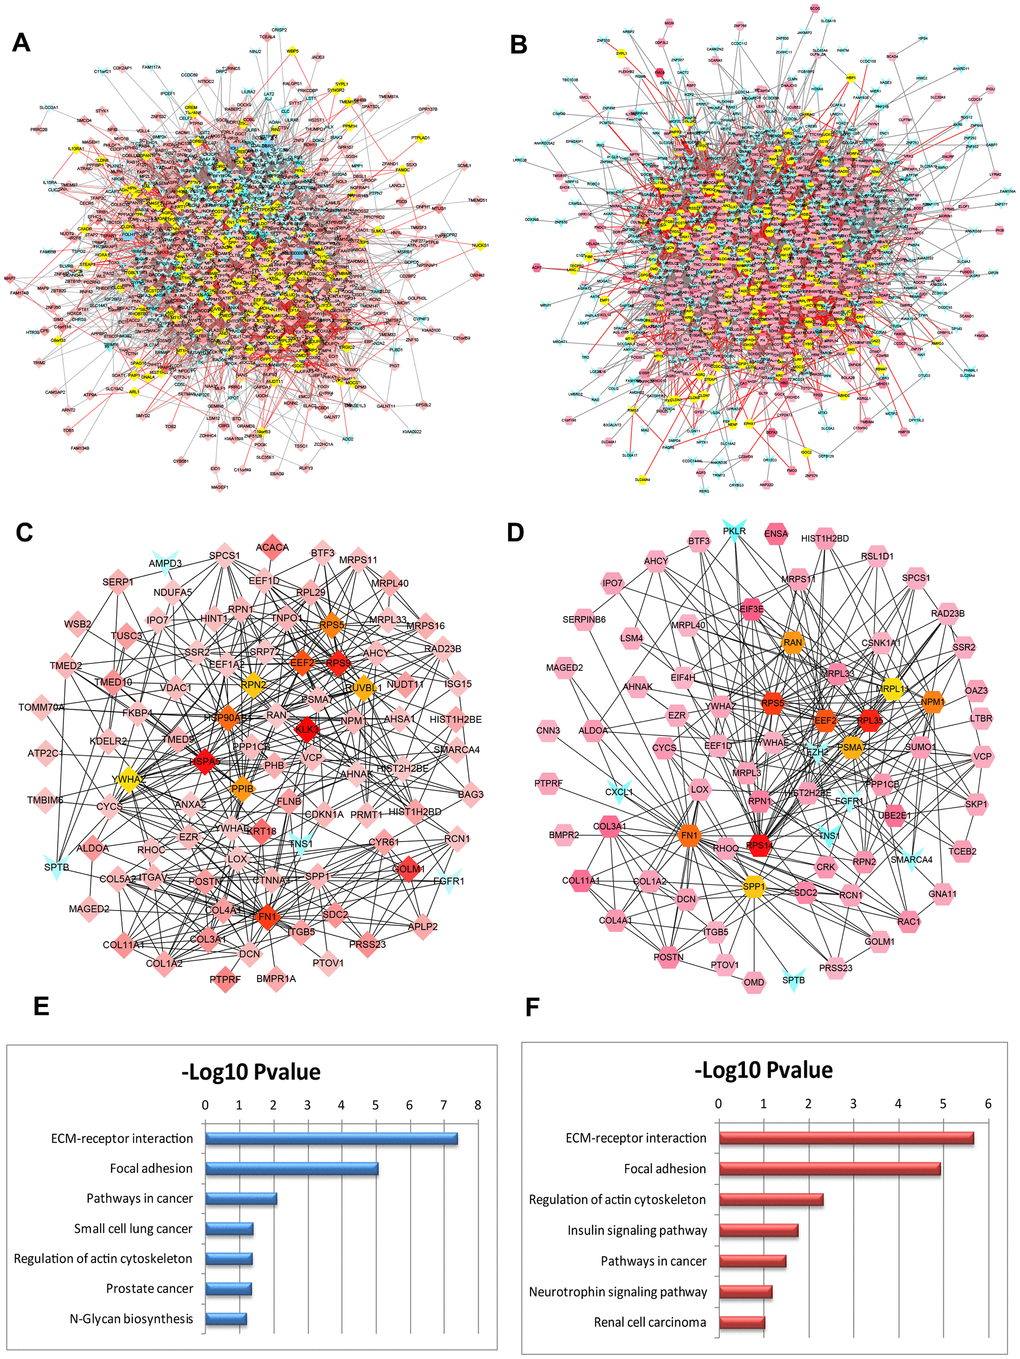 PPI networks constructed by the DEGs from BM PCa and pathway function enrichment. Deregulated gene networks of GSE32269 (A) and GSE77930 (B). (C) Network of significant hub proteins screened from GSE32269. (D) Network of significant hub proteins screened from GSE77930. Red and green intensities indicate the degree of upregulation and downregulation, respectively. (E) Pathway enrichment in network C. (F) Pathway enrichment in network D.